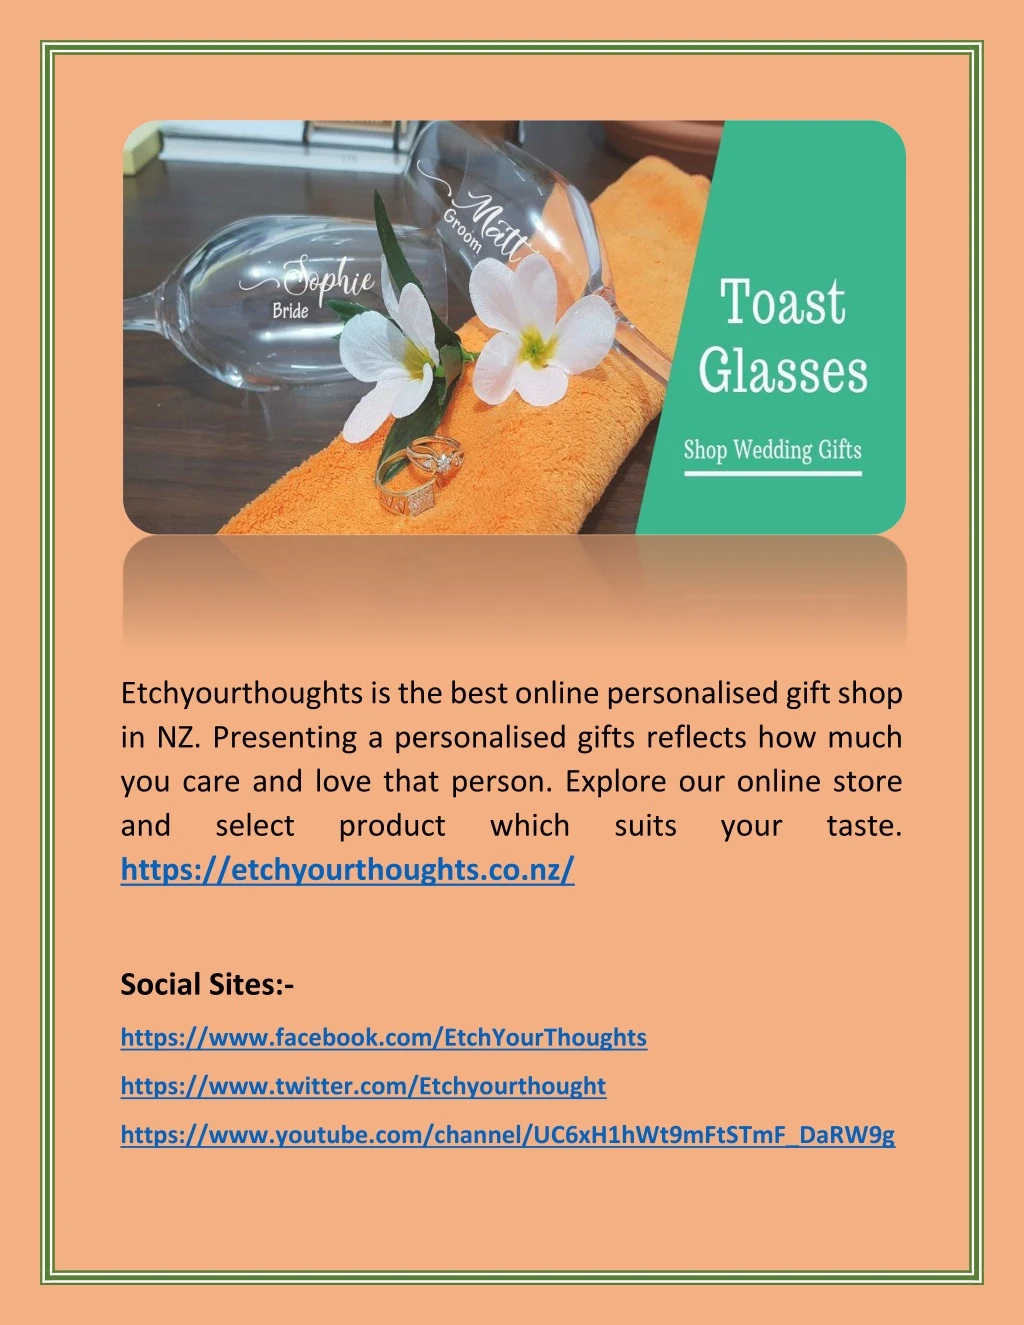 etchyourthoughts is the best online personalised